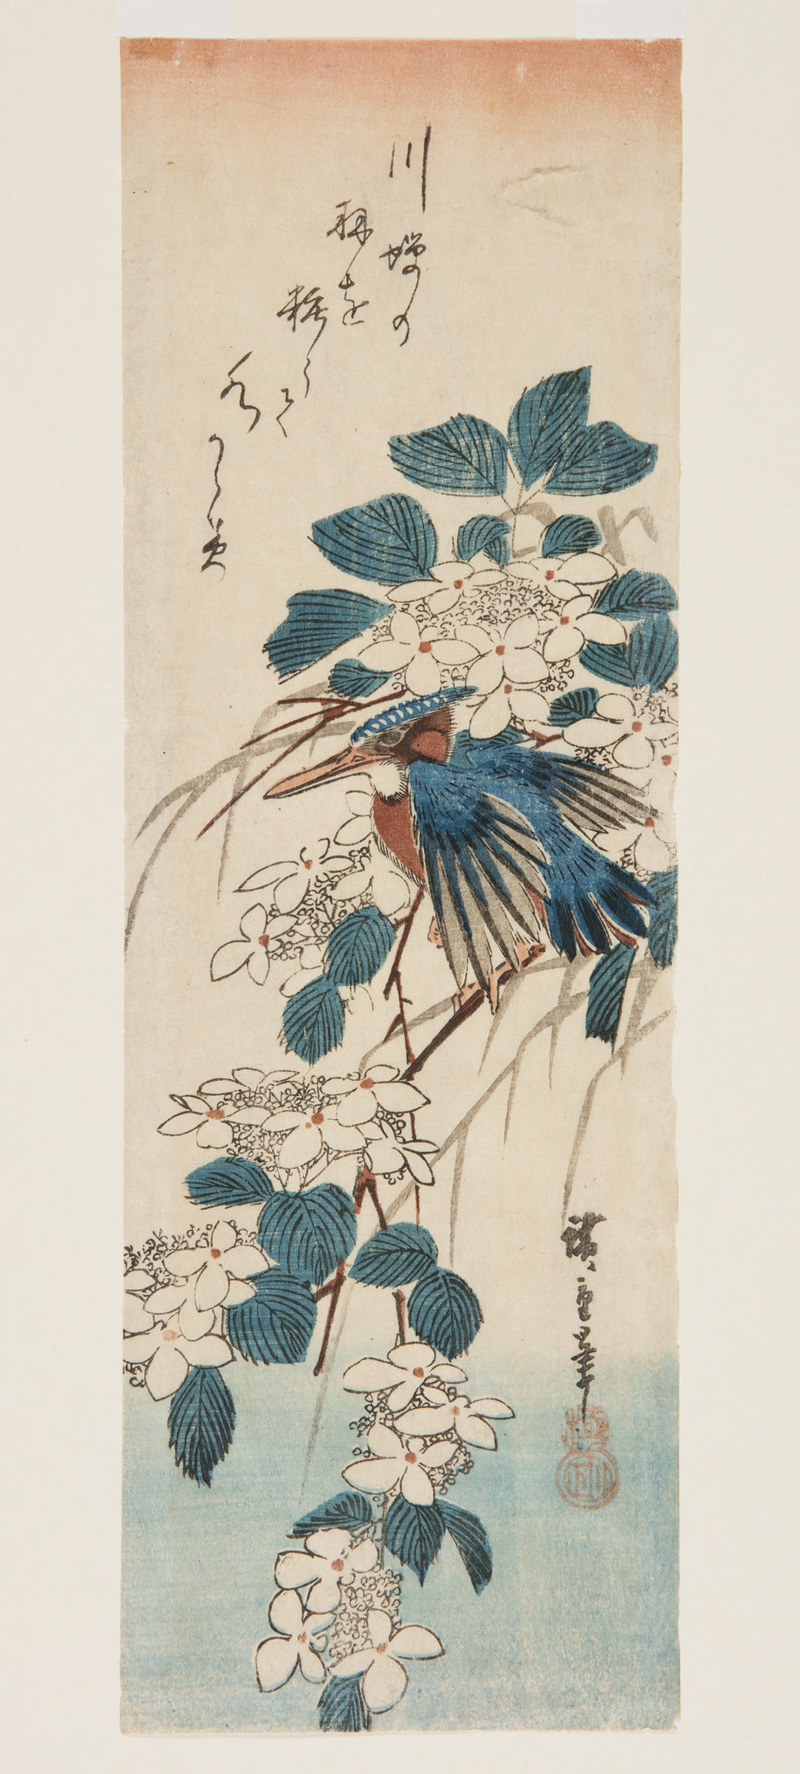 Japanese print of a kingfisher bird sat on a branch amongst the flowers.